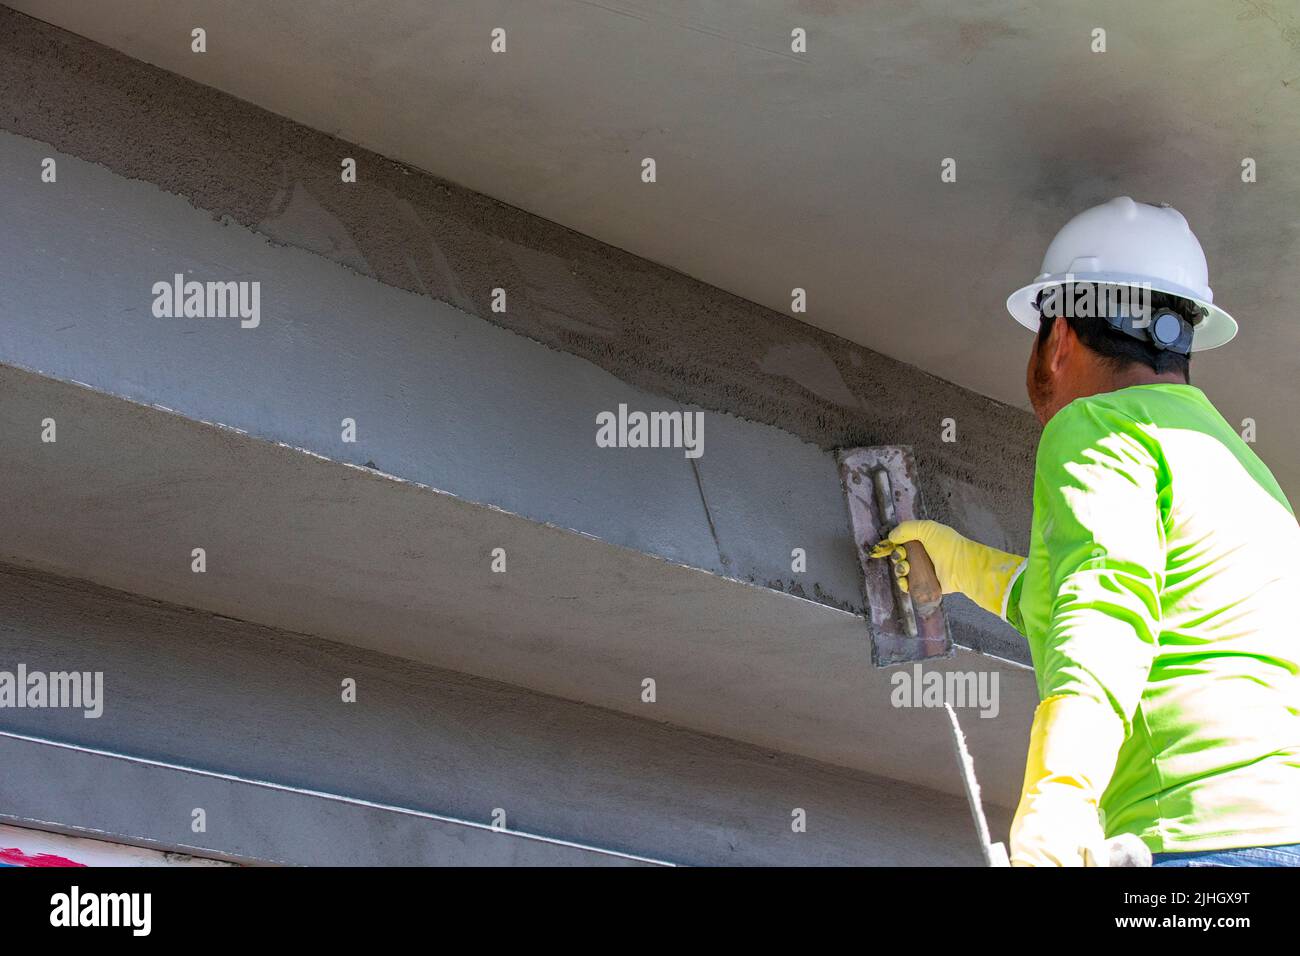 Construction professional using a trowel to apply stucco mud to the exterior of a multiplex building, Stock Photo